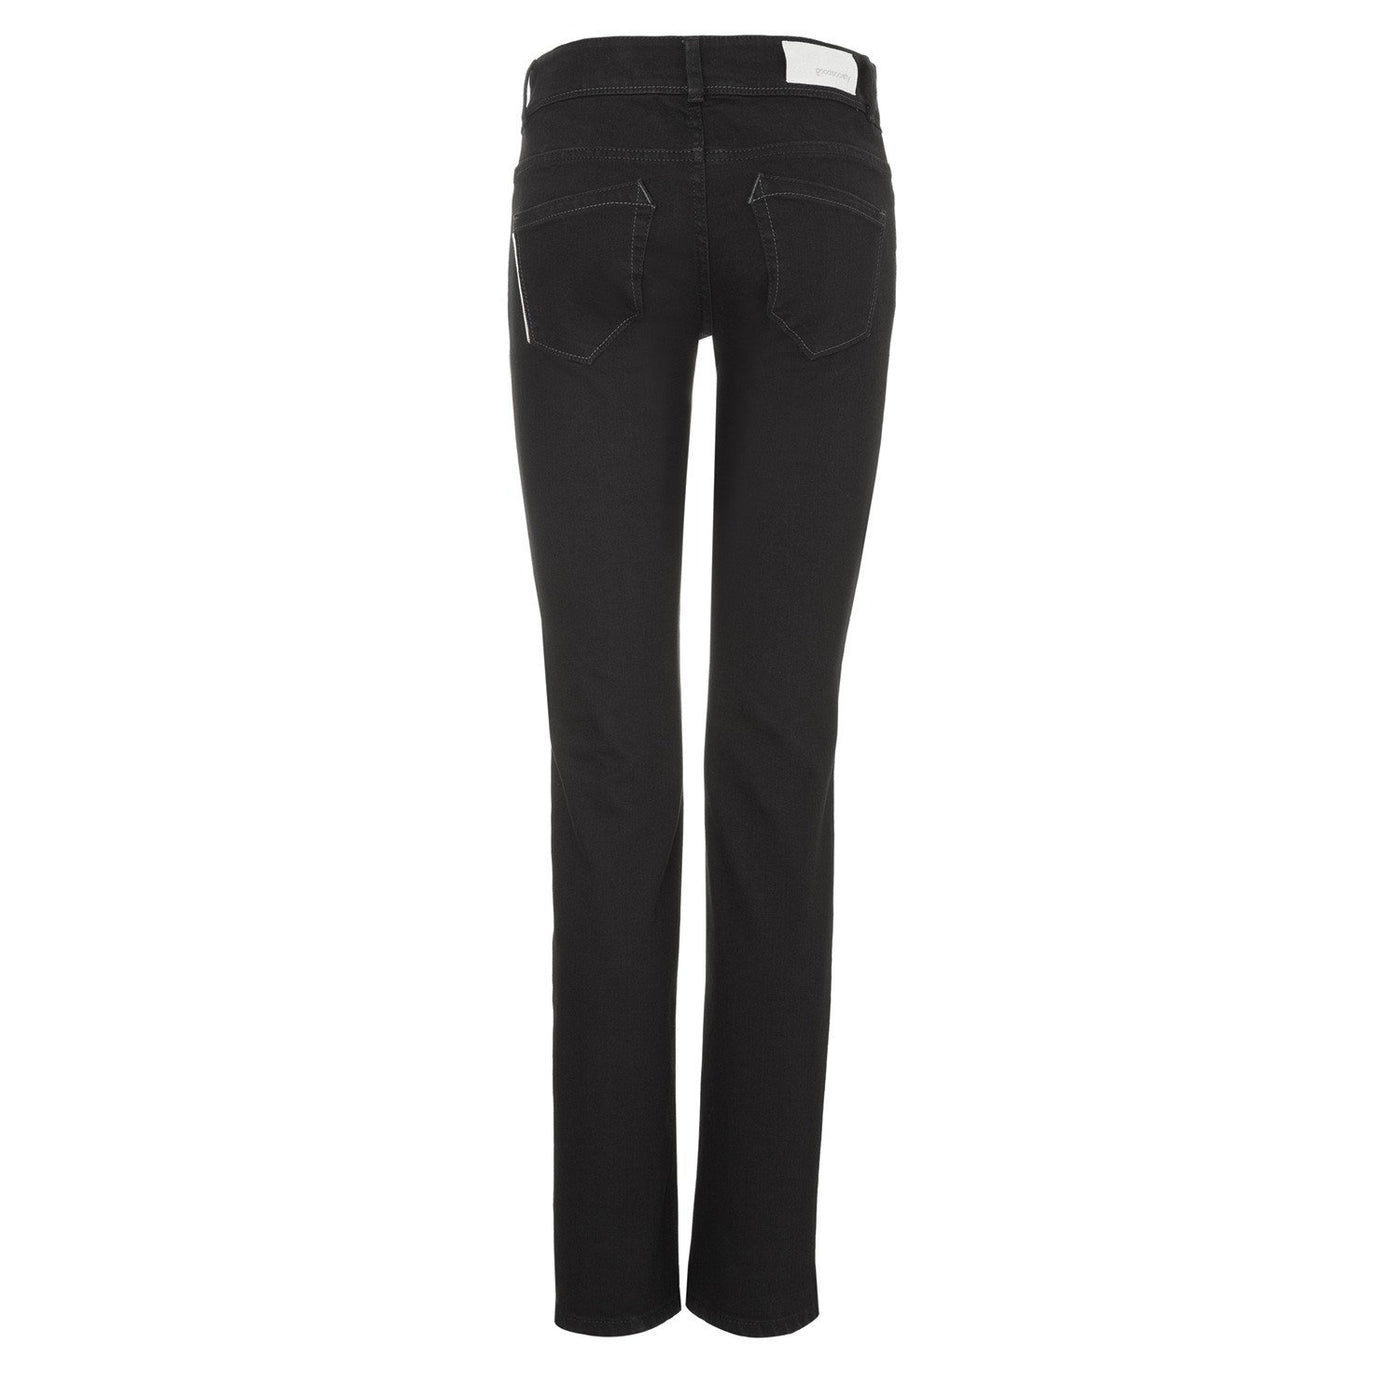 Womens Straight Jeans - Black One Wash